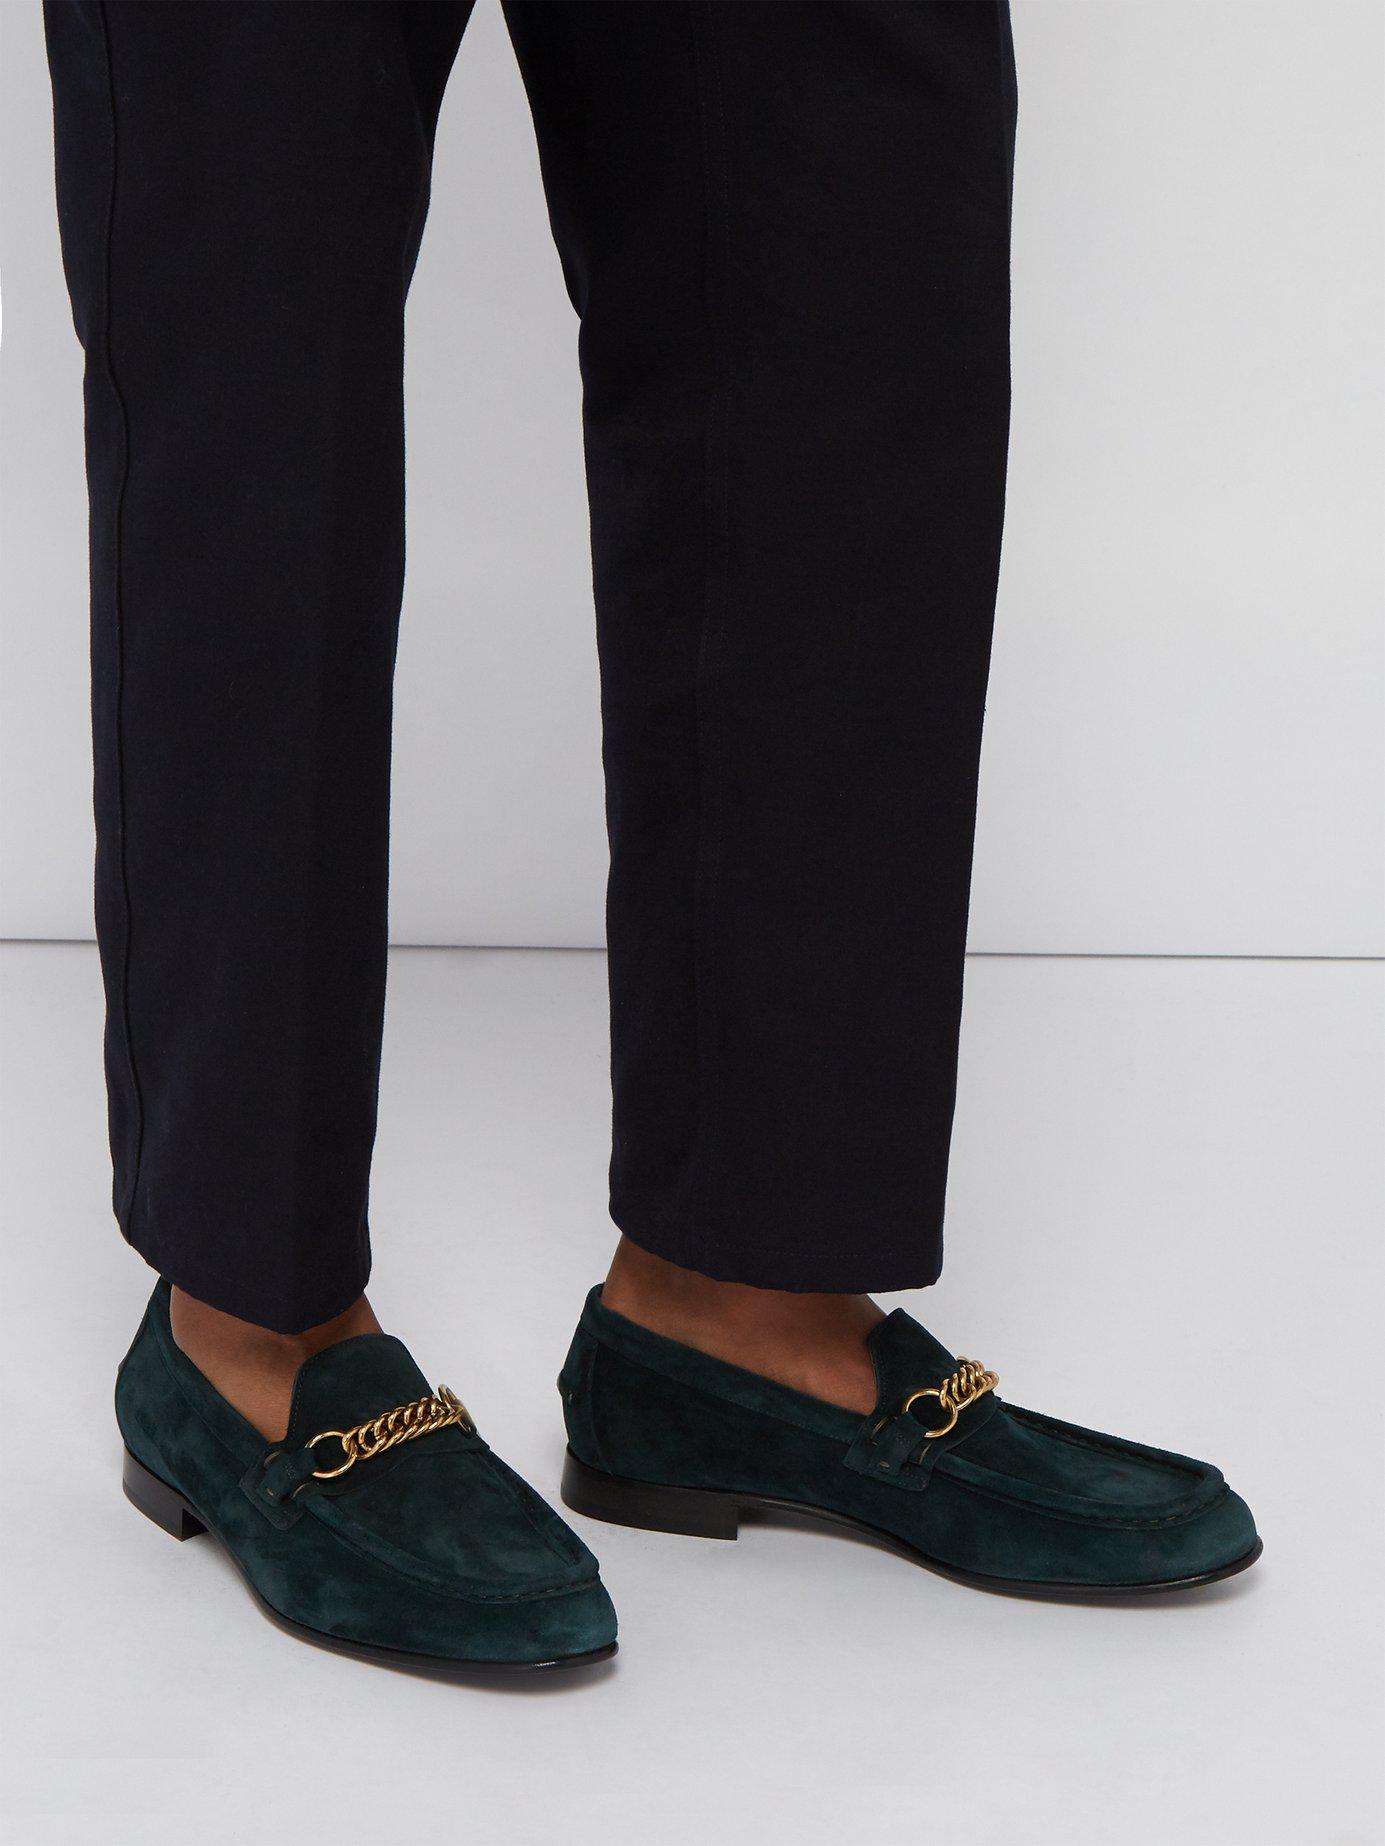 Burberry Solway Chain Suede Loafers in Green for Men - Lyst